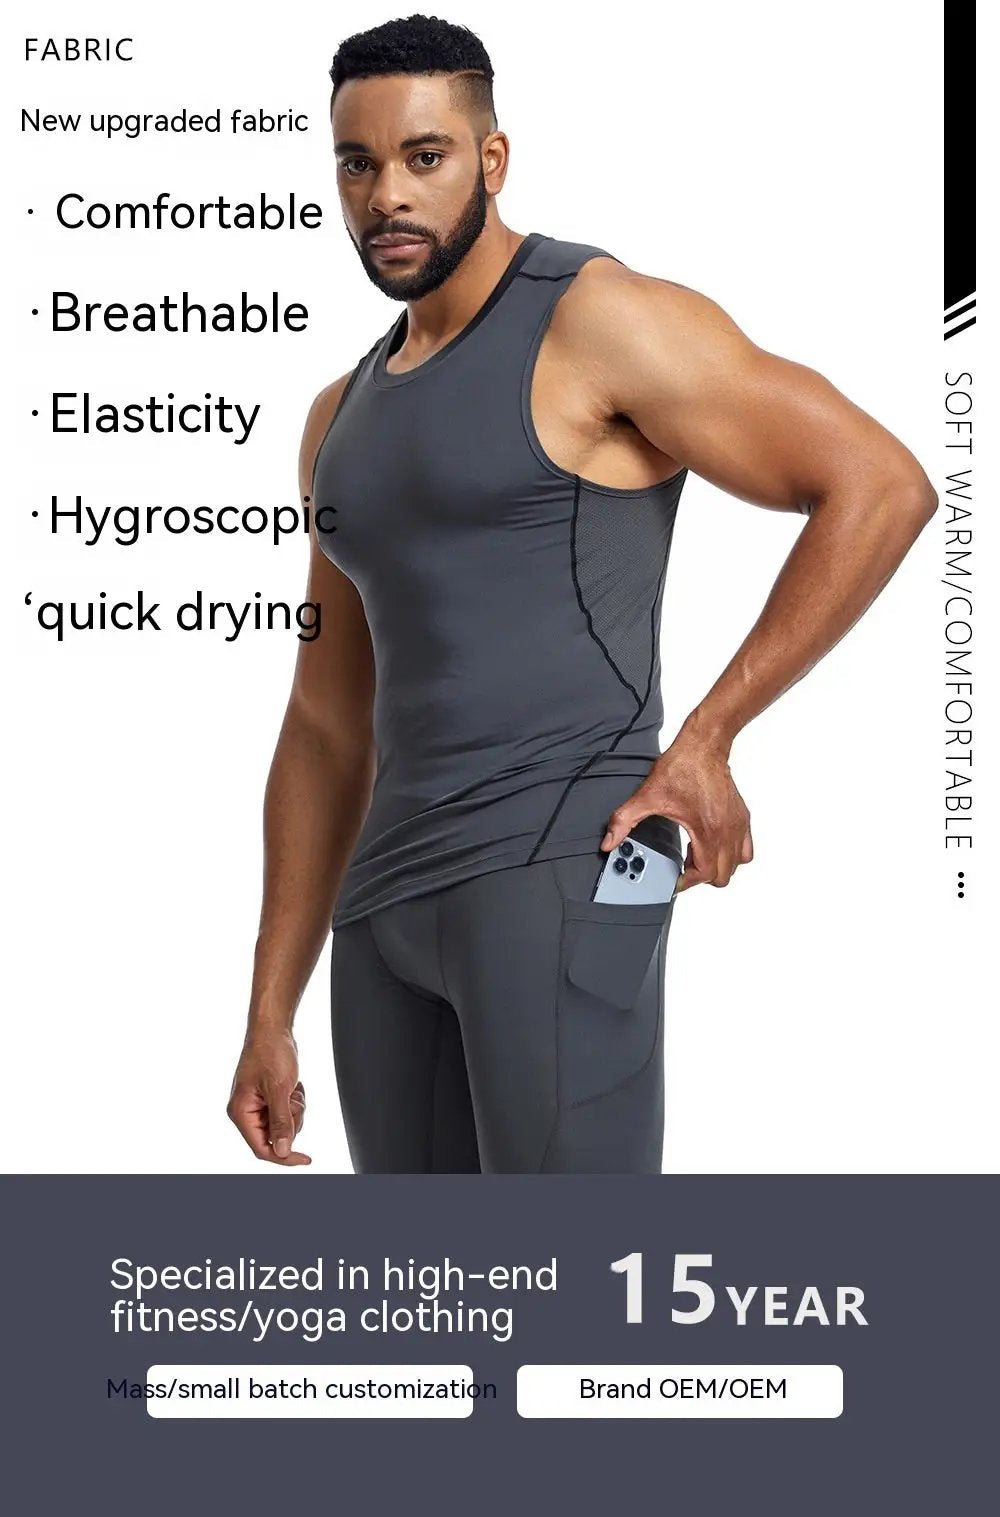 WILKYsMen ClothesSports Vest Men's Tight Bottoming Sleeveless Workout Clothes ViolentlyThis Sports Vest is perfect for men who want to stay dry and comfortable during workouts. Its tight fit and quick-drying fabric make it ideal for intense exercise, w